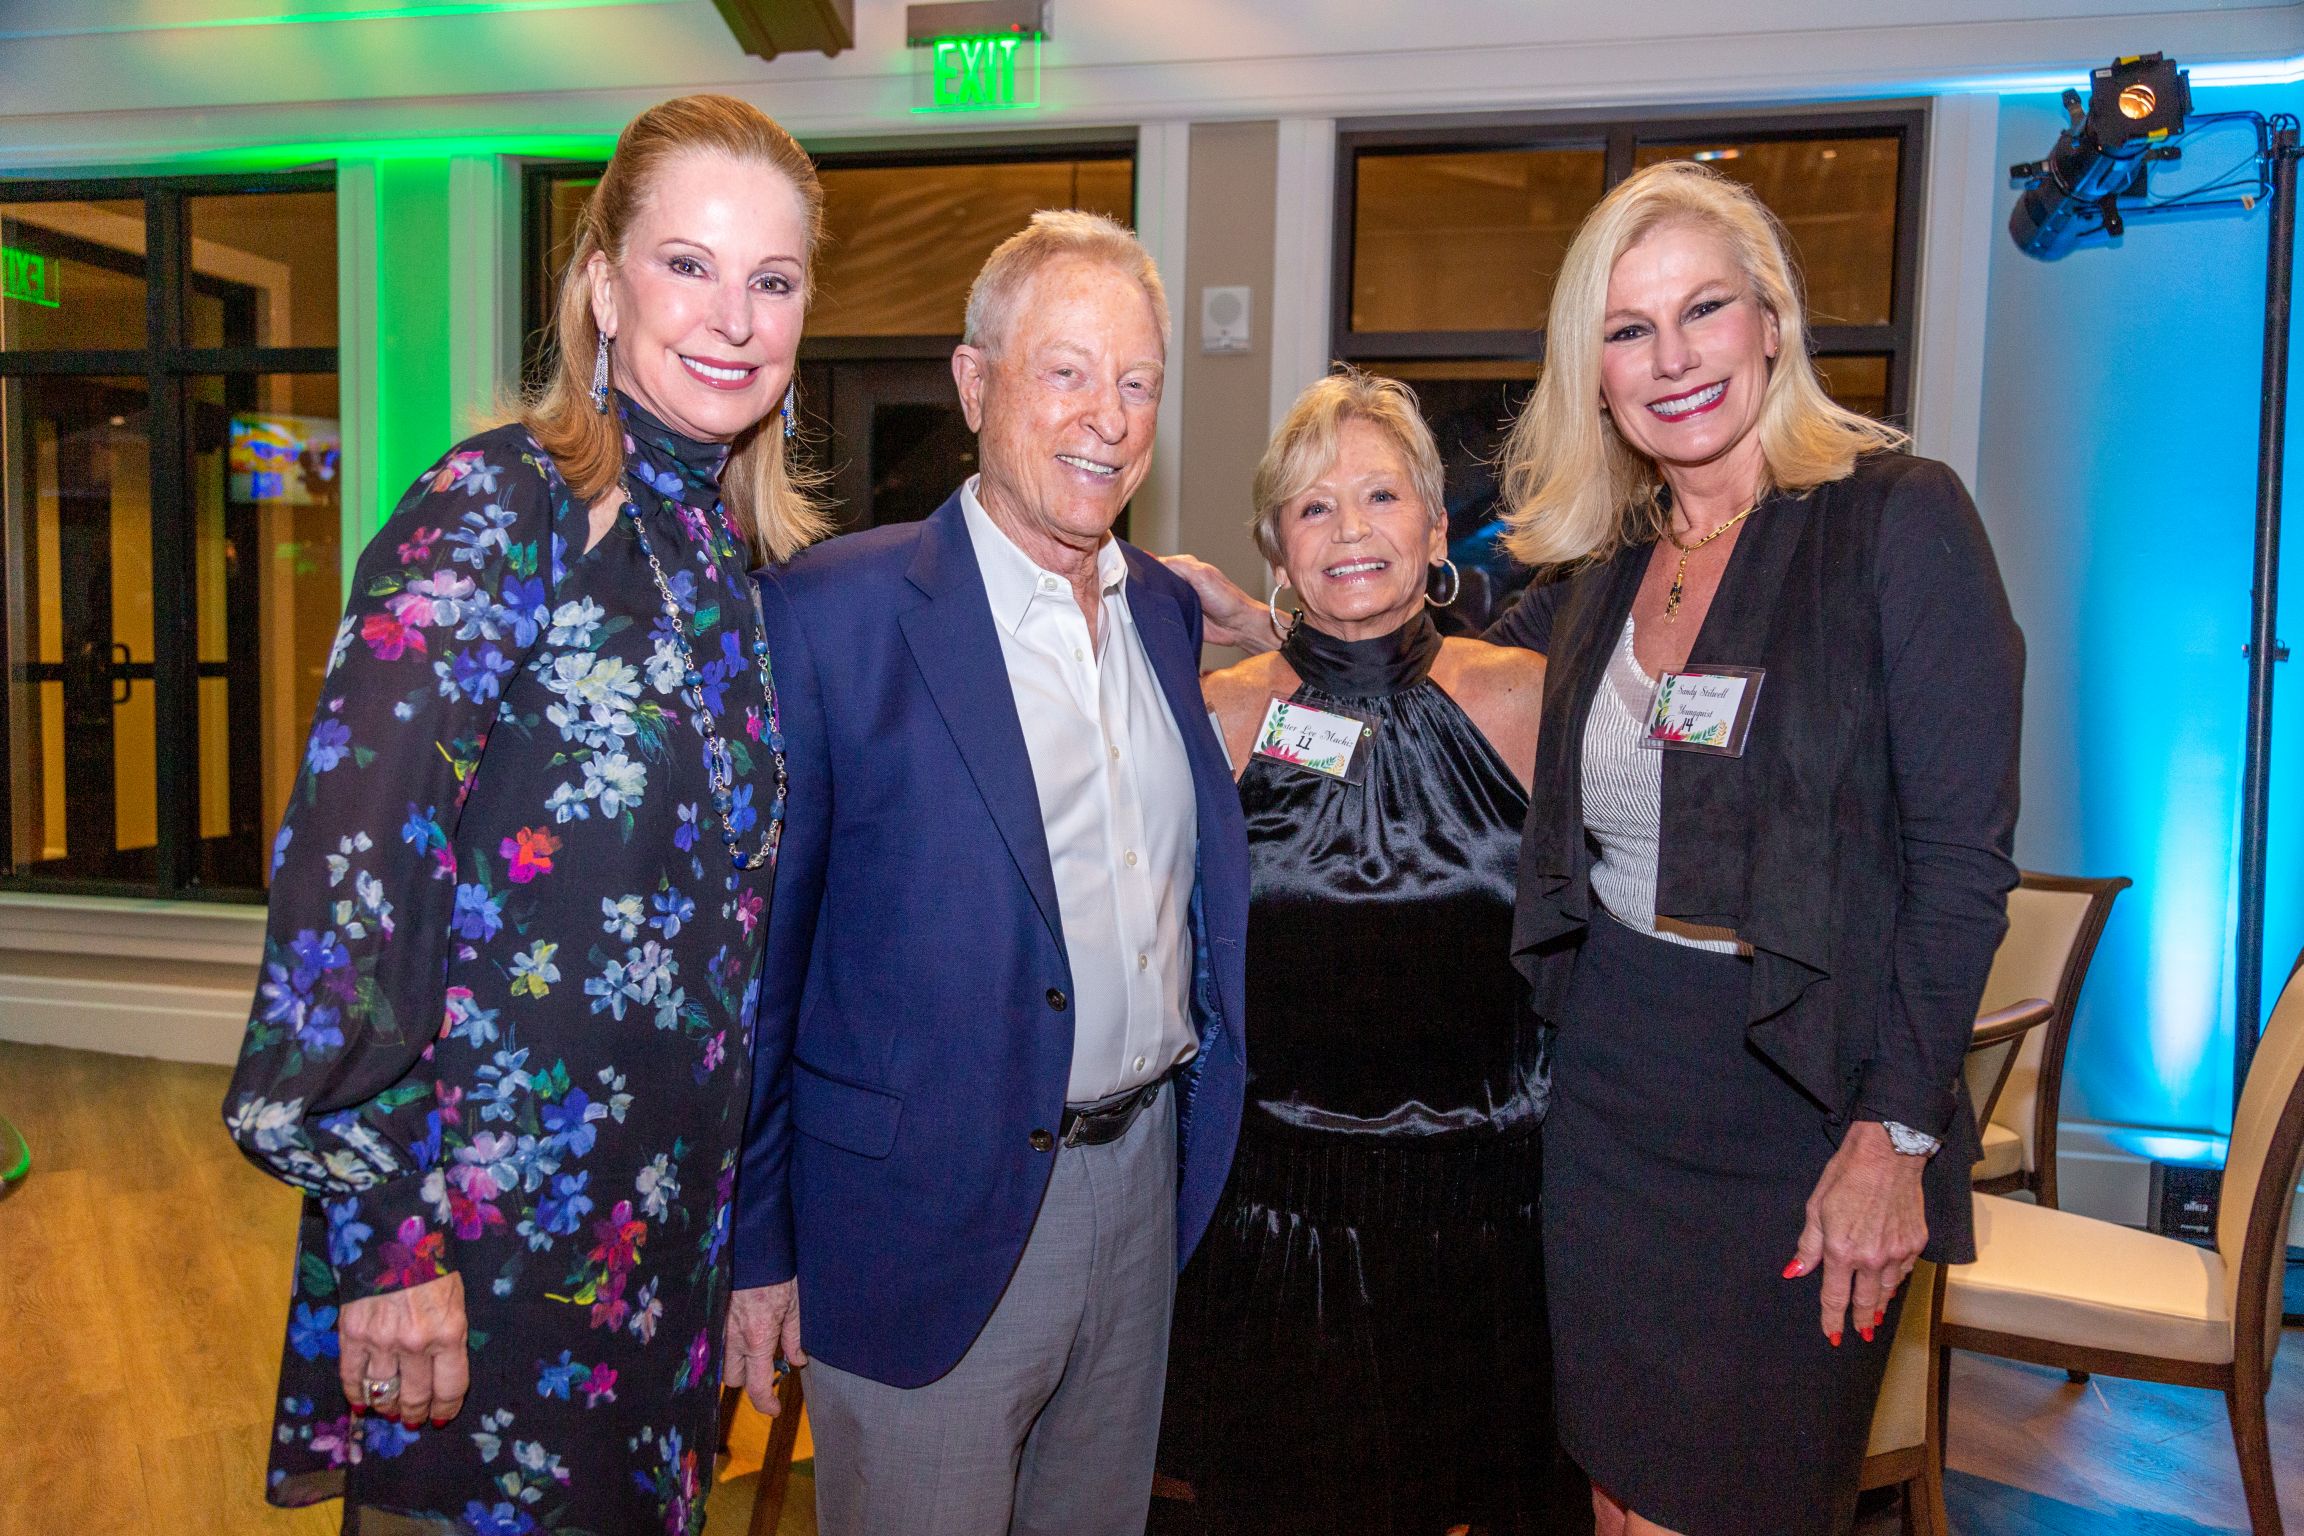 Lee Health Foundation honors Dr. Steve Machiz with Humanitarian Award at its Evening of Gratitude event